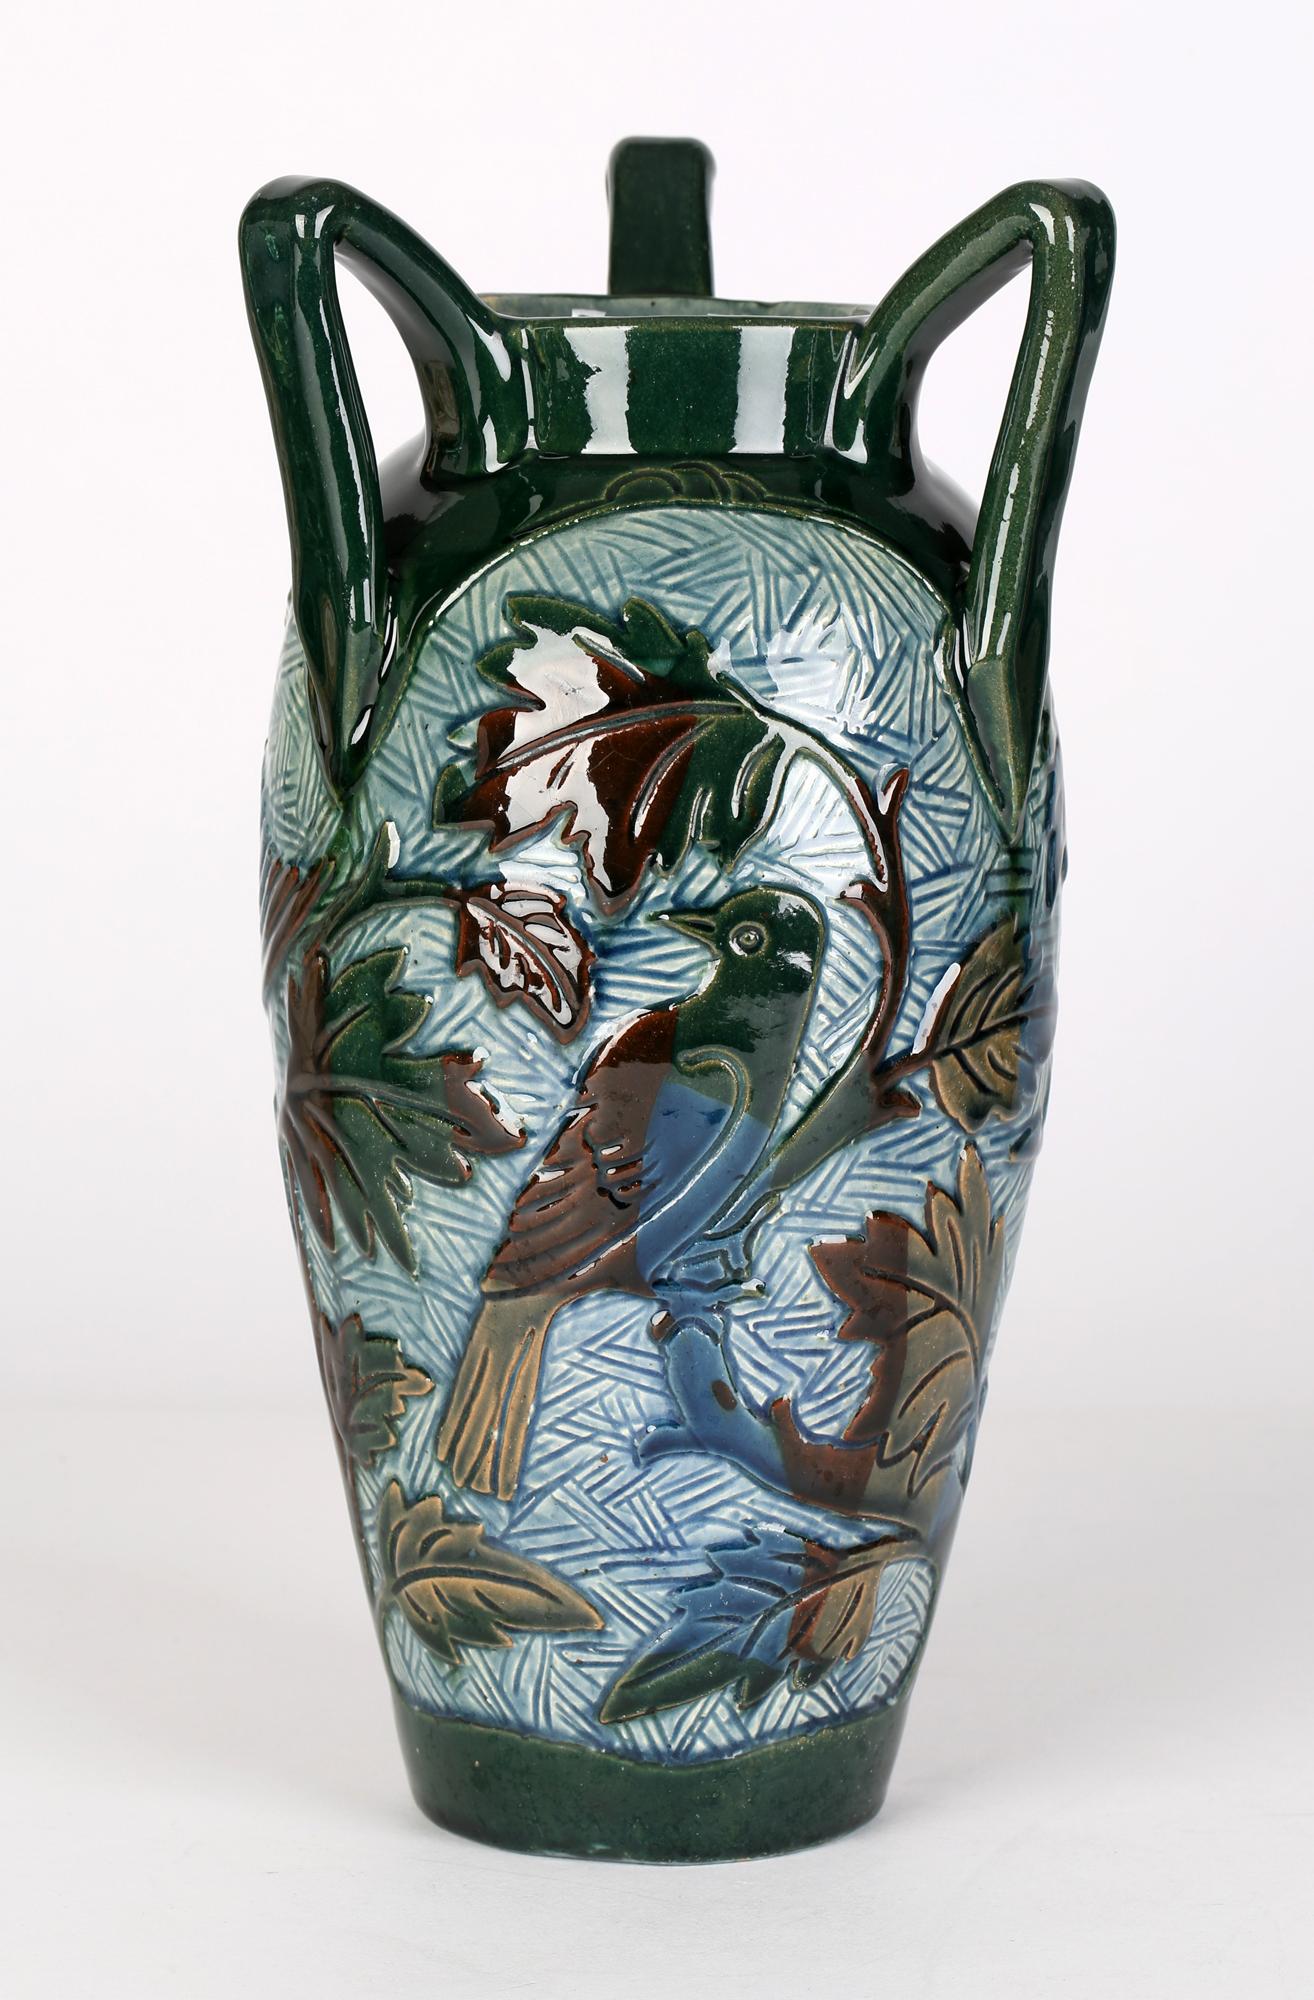 A very stylish Barnstaple, Devon three handled sgraffito art pottery vase decorated with birds by Alexander Lauder (British, 1836-1921) dating from around 1890. The lightly potted earthenware vase is of tall baluster shape standing on narrow flat